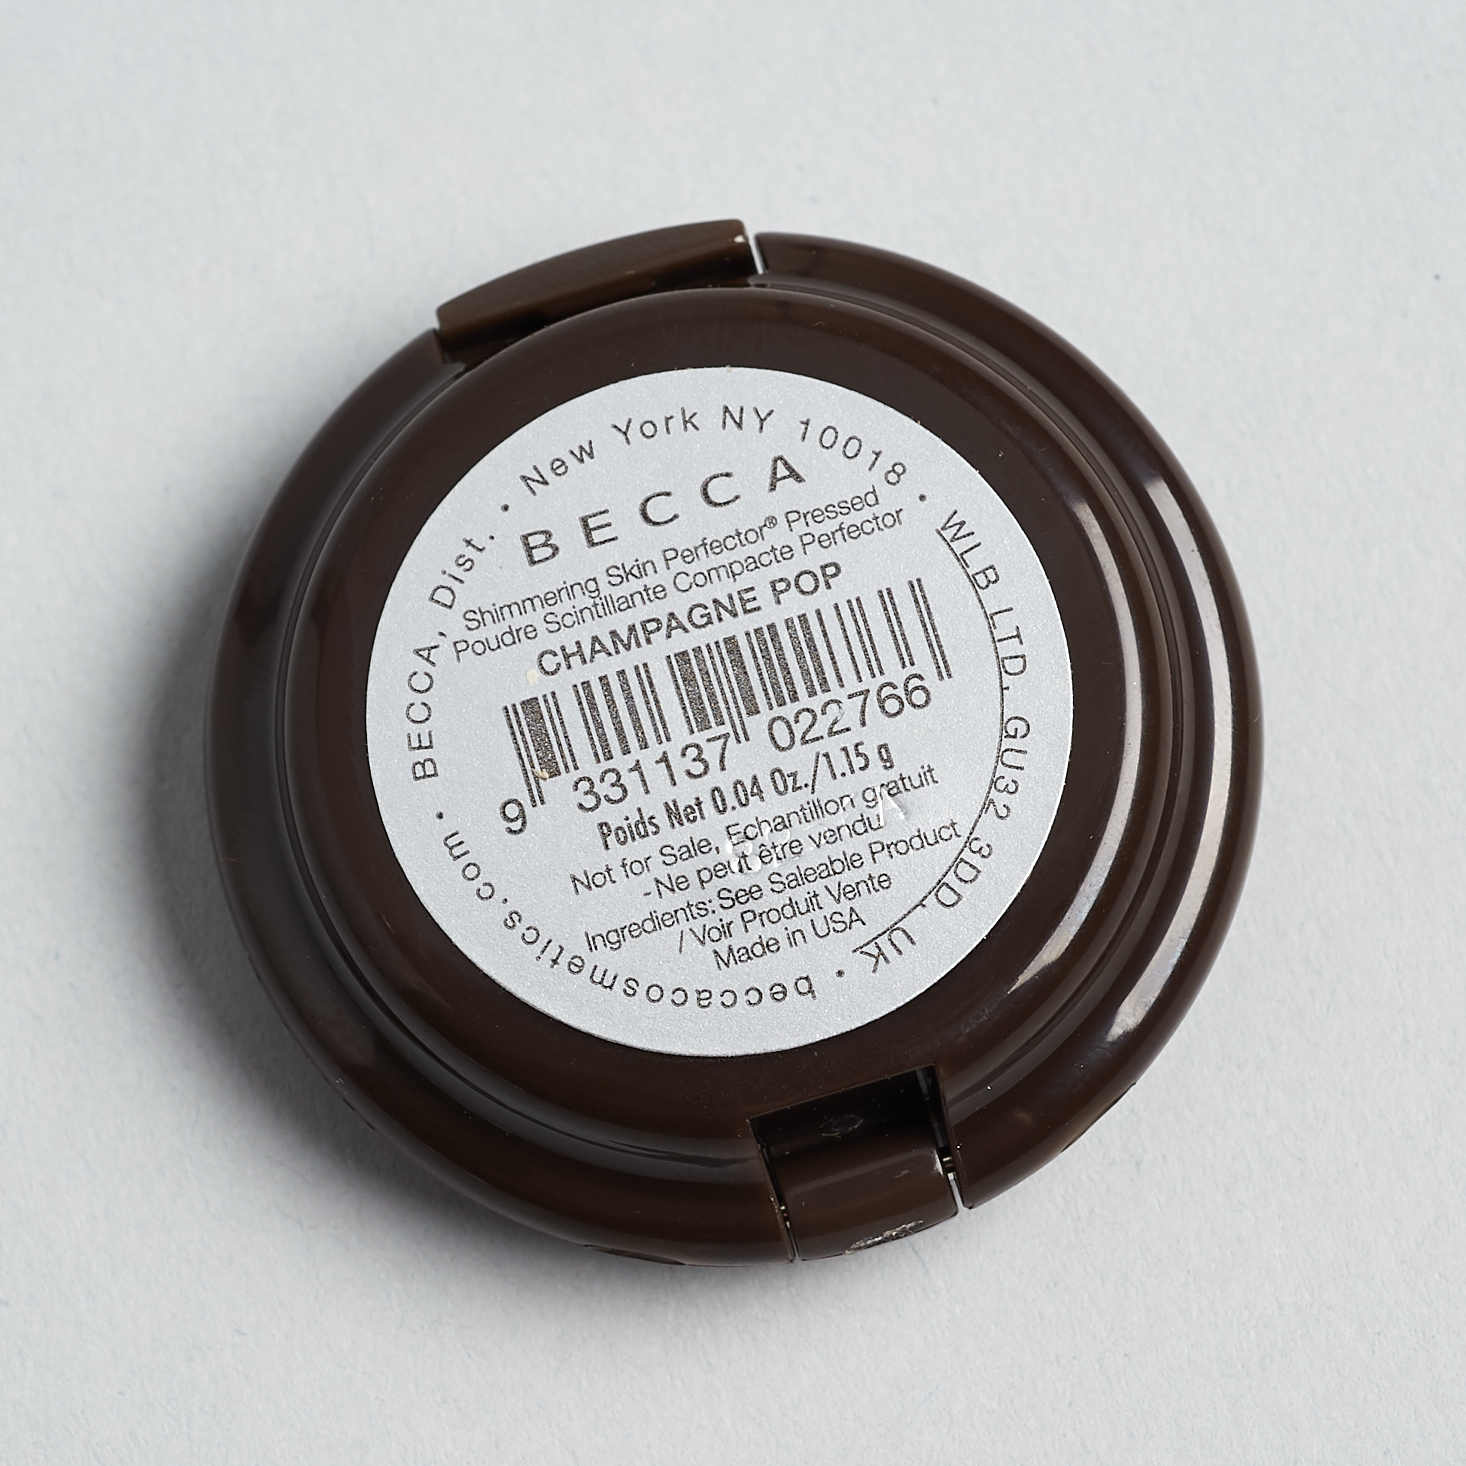 bottom of becca compact with info sticker